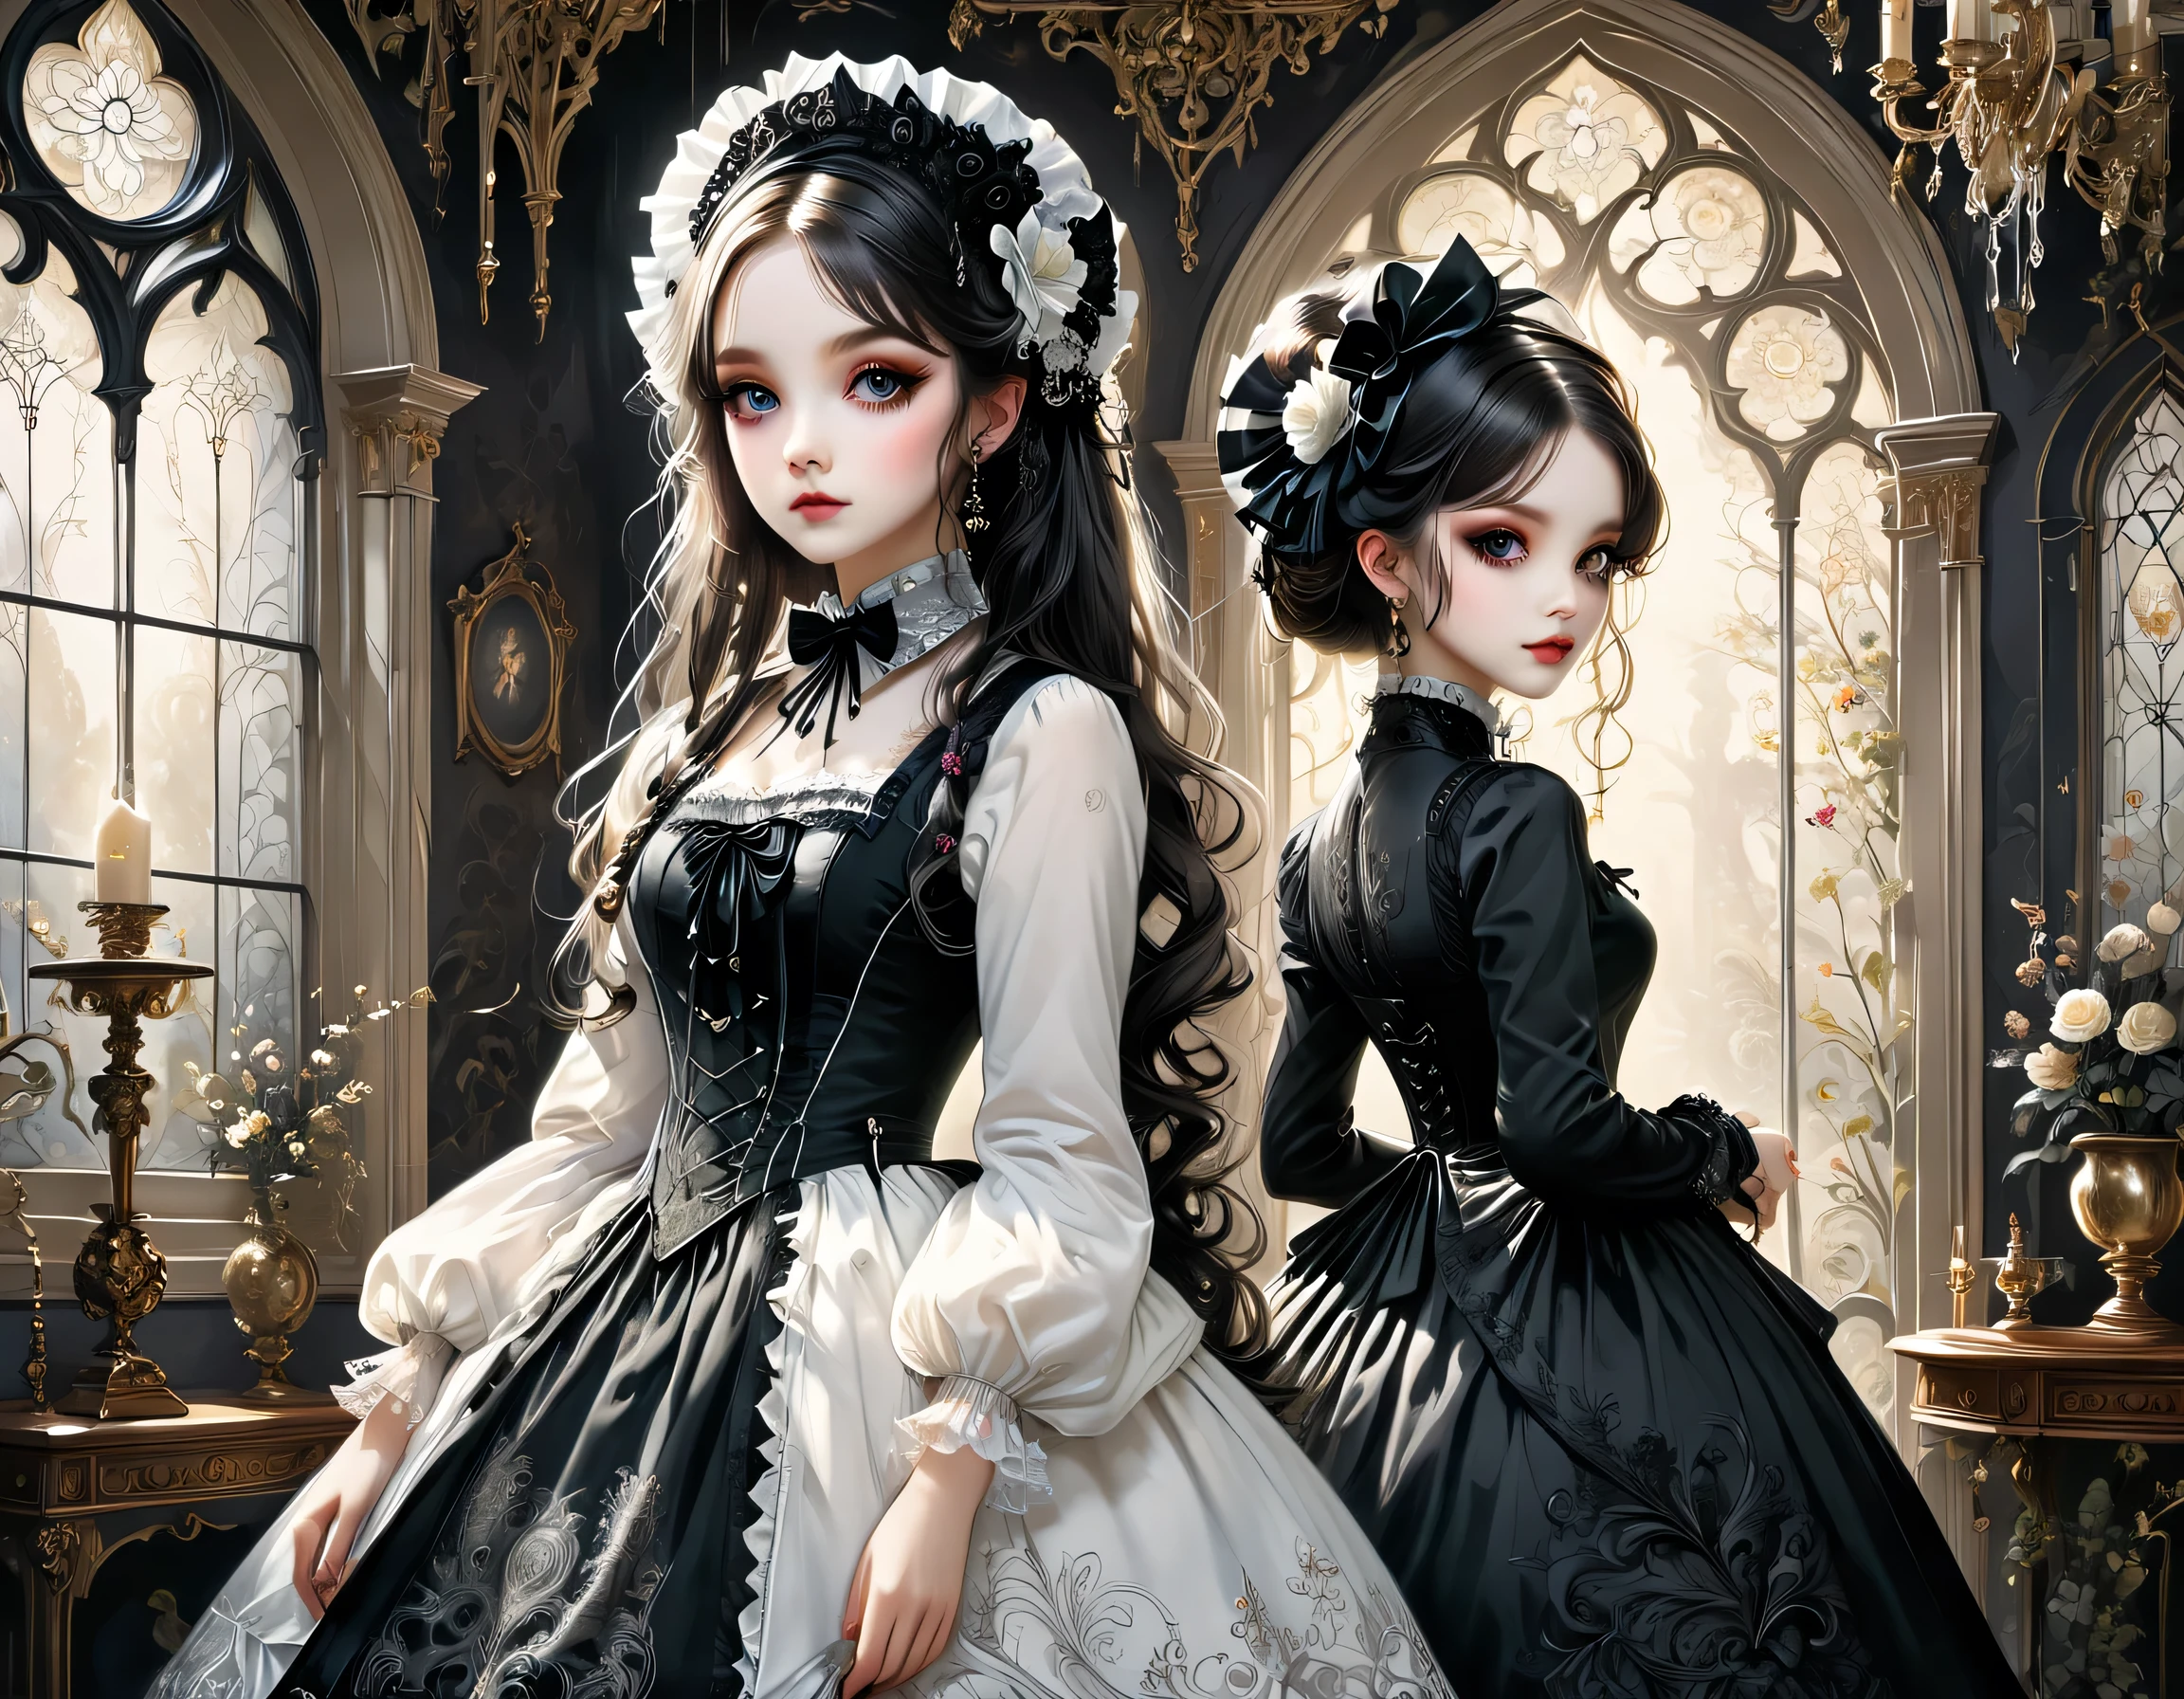 Gothic horror paintings,((Beautiful girl standing:Gothic Lolita:12 years old:Ephemeral:beautiful girl:cute:Adorable:Perfect Face:white:eyelash:Big eyes)),Gothic House,Recall,Black and white,scary but beautiful,Gothic Beauty,Expressing beautiful madness,Shrouded in mystery,Placing dark clouds that foreshadow tragedy in a beautiful gothic house,,detailed,Use red as an accent color,Race,embroidery,Detailed patterns,rendering,Designer House,Luxury Homes,Nice,quiet,Beautiful light and shadow,Gothic Room,Golden Ratio,Anatomically correct,Rococo